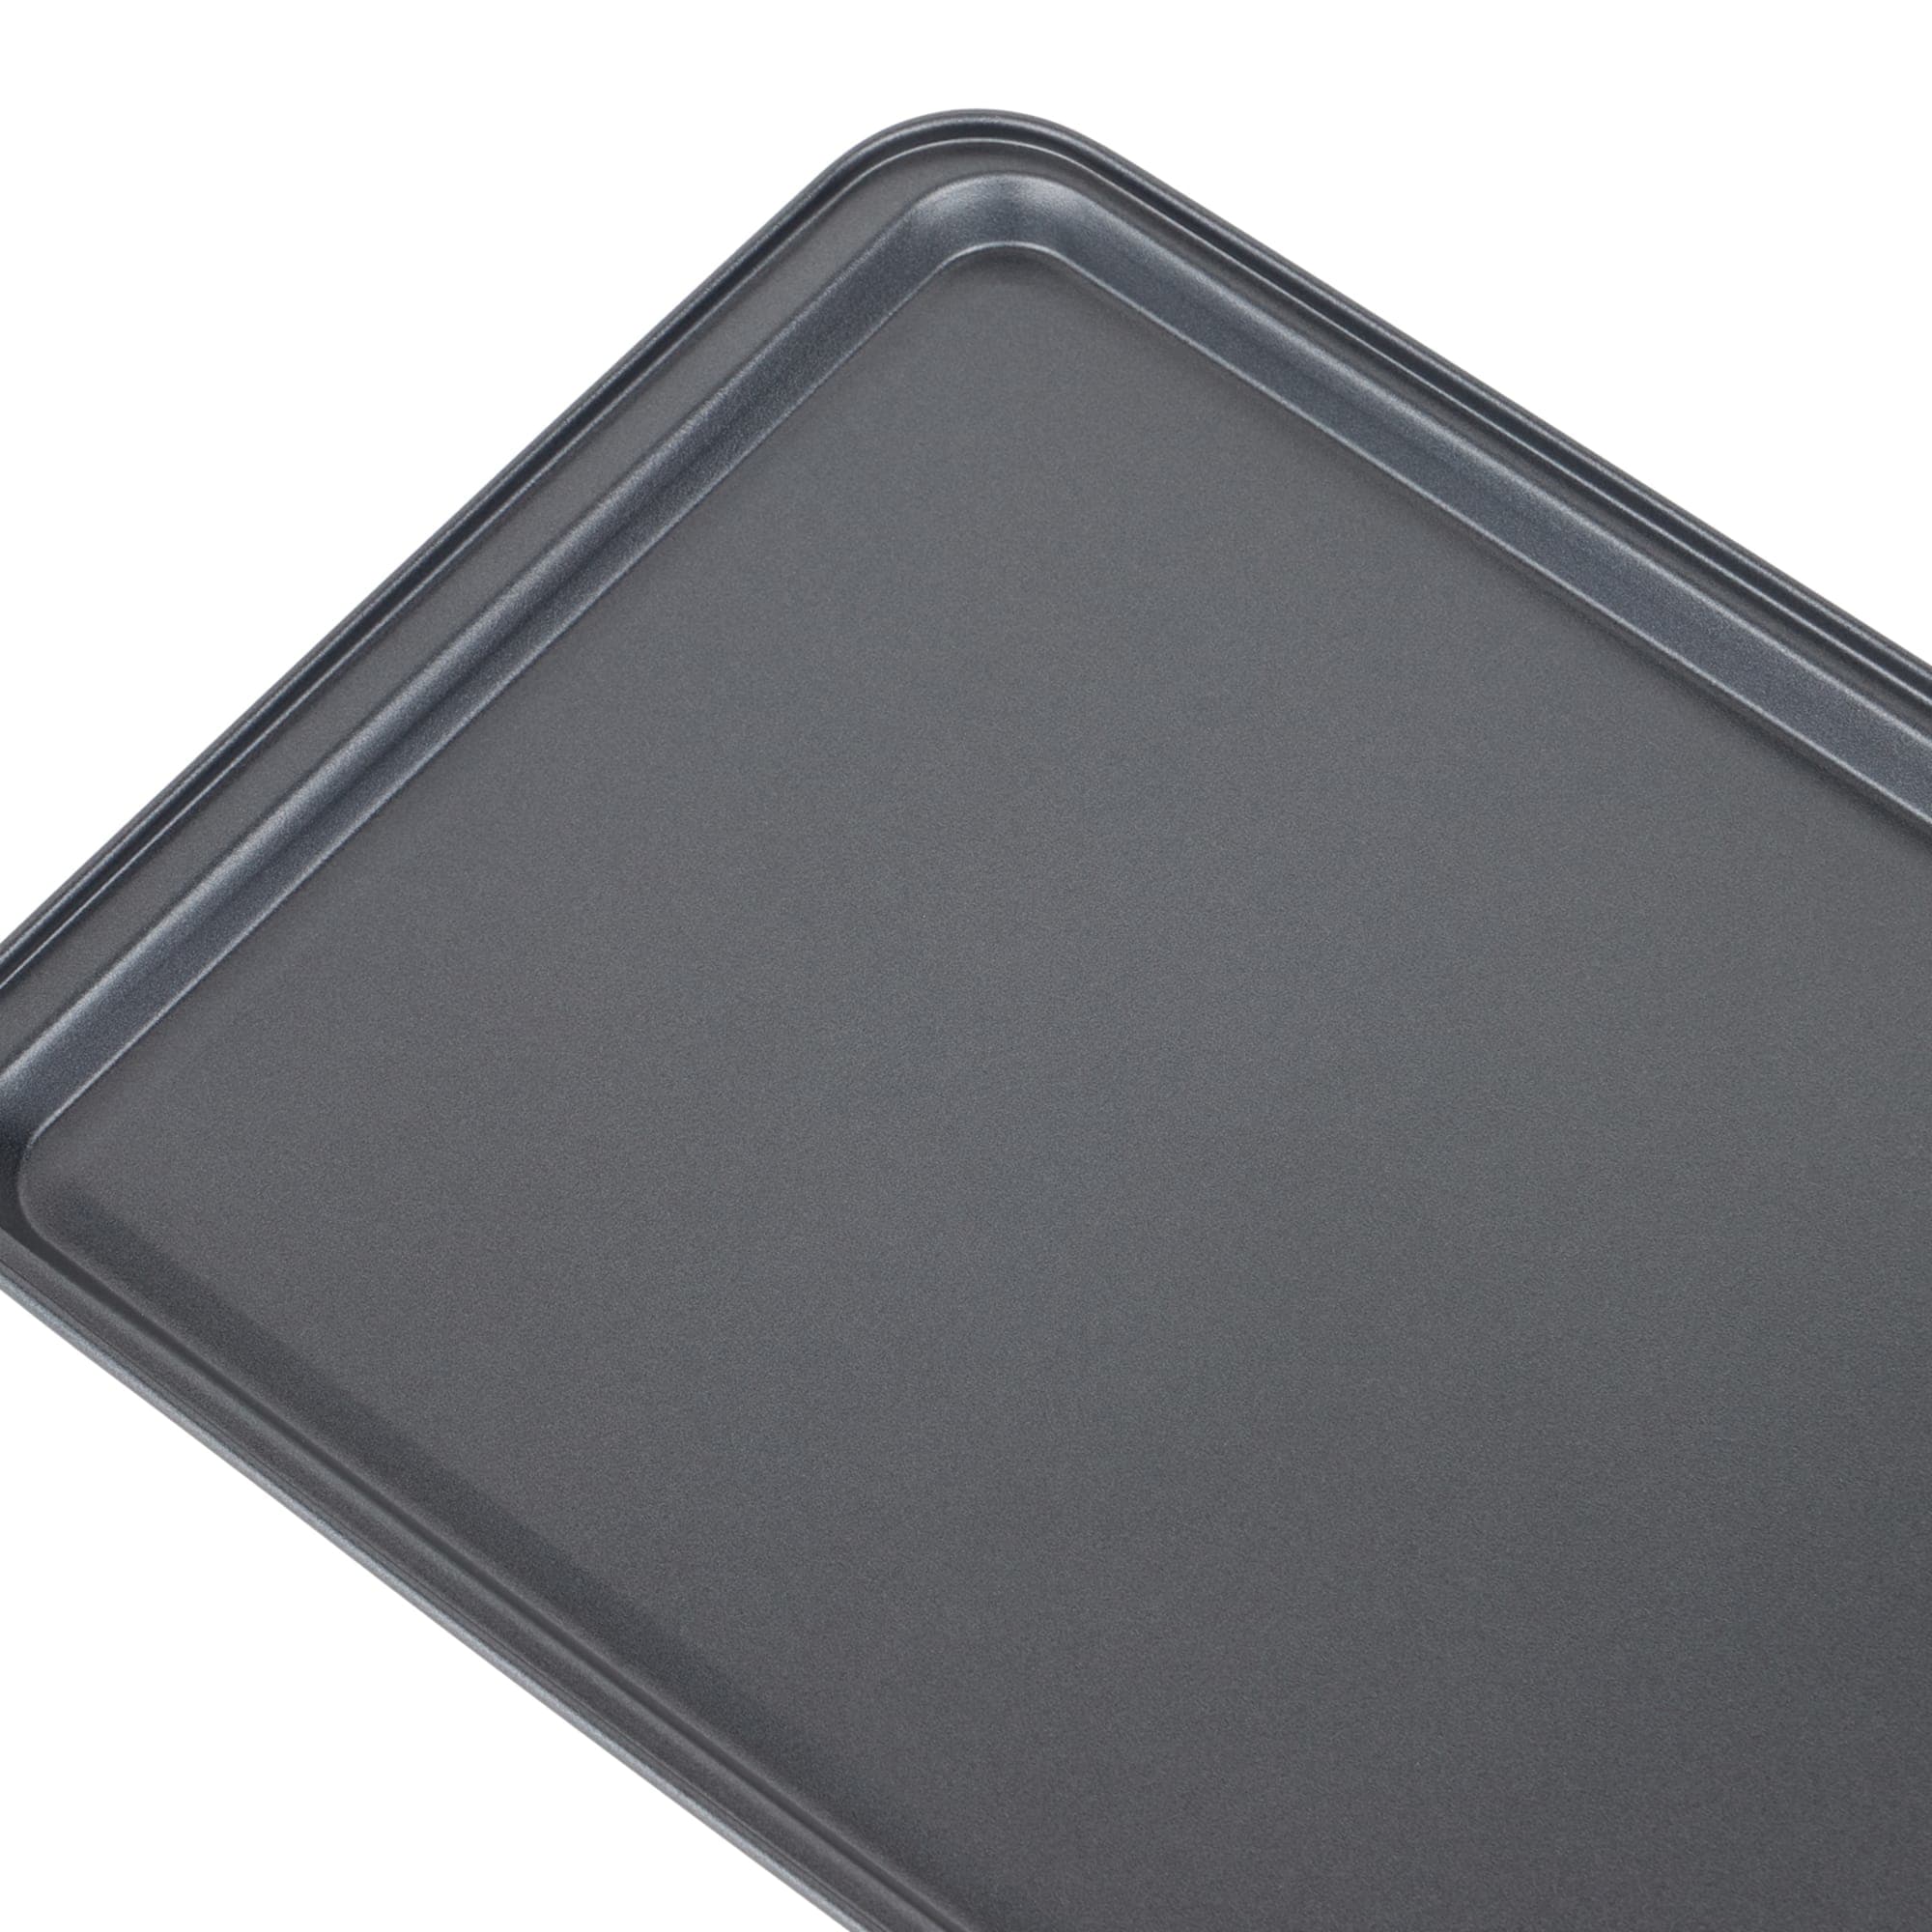 Home Basics Non-Stick Cookie Sheet $4.00 EACH, CASE PACK OF 24